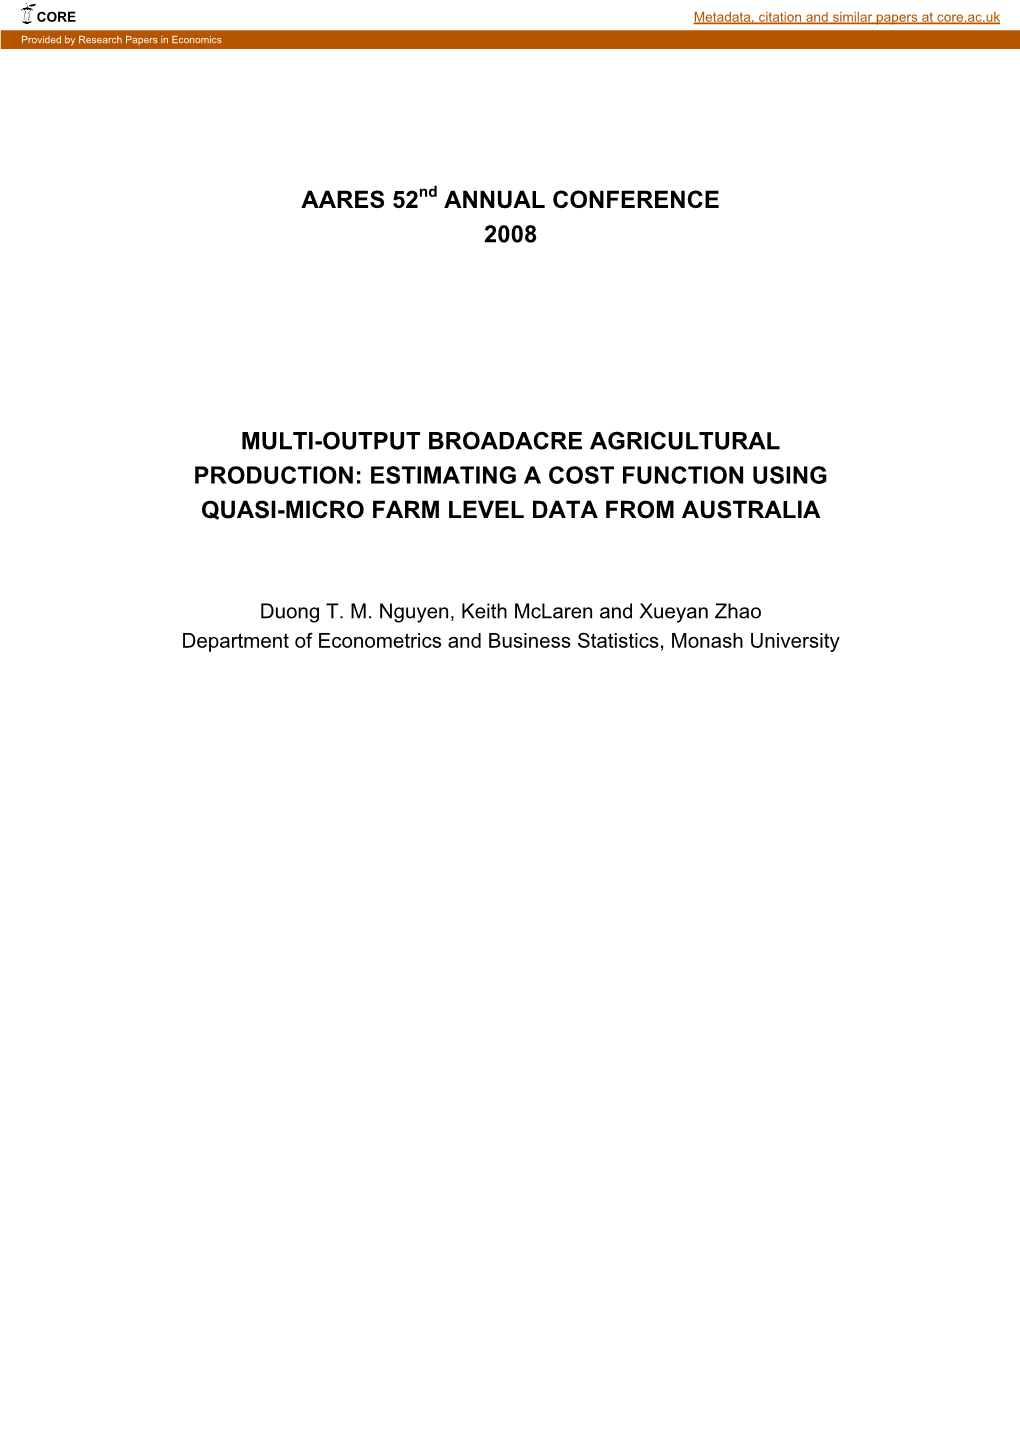 Multi-Output Broadacre Agricultural Production: Estimating a Cost Function Using Quasi-Micro Farm Level Data from Australia